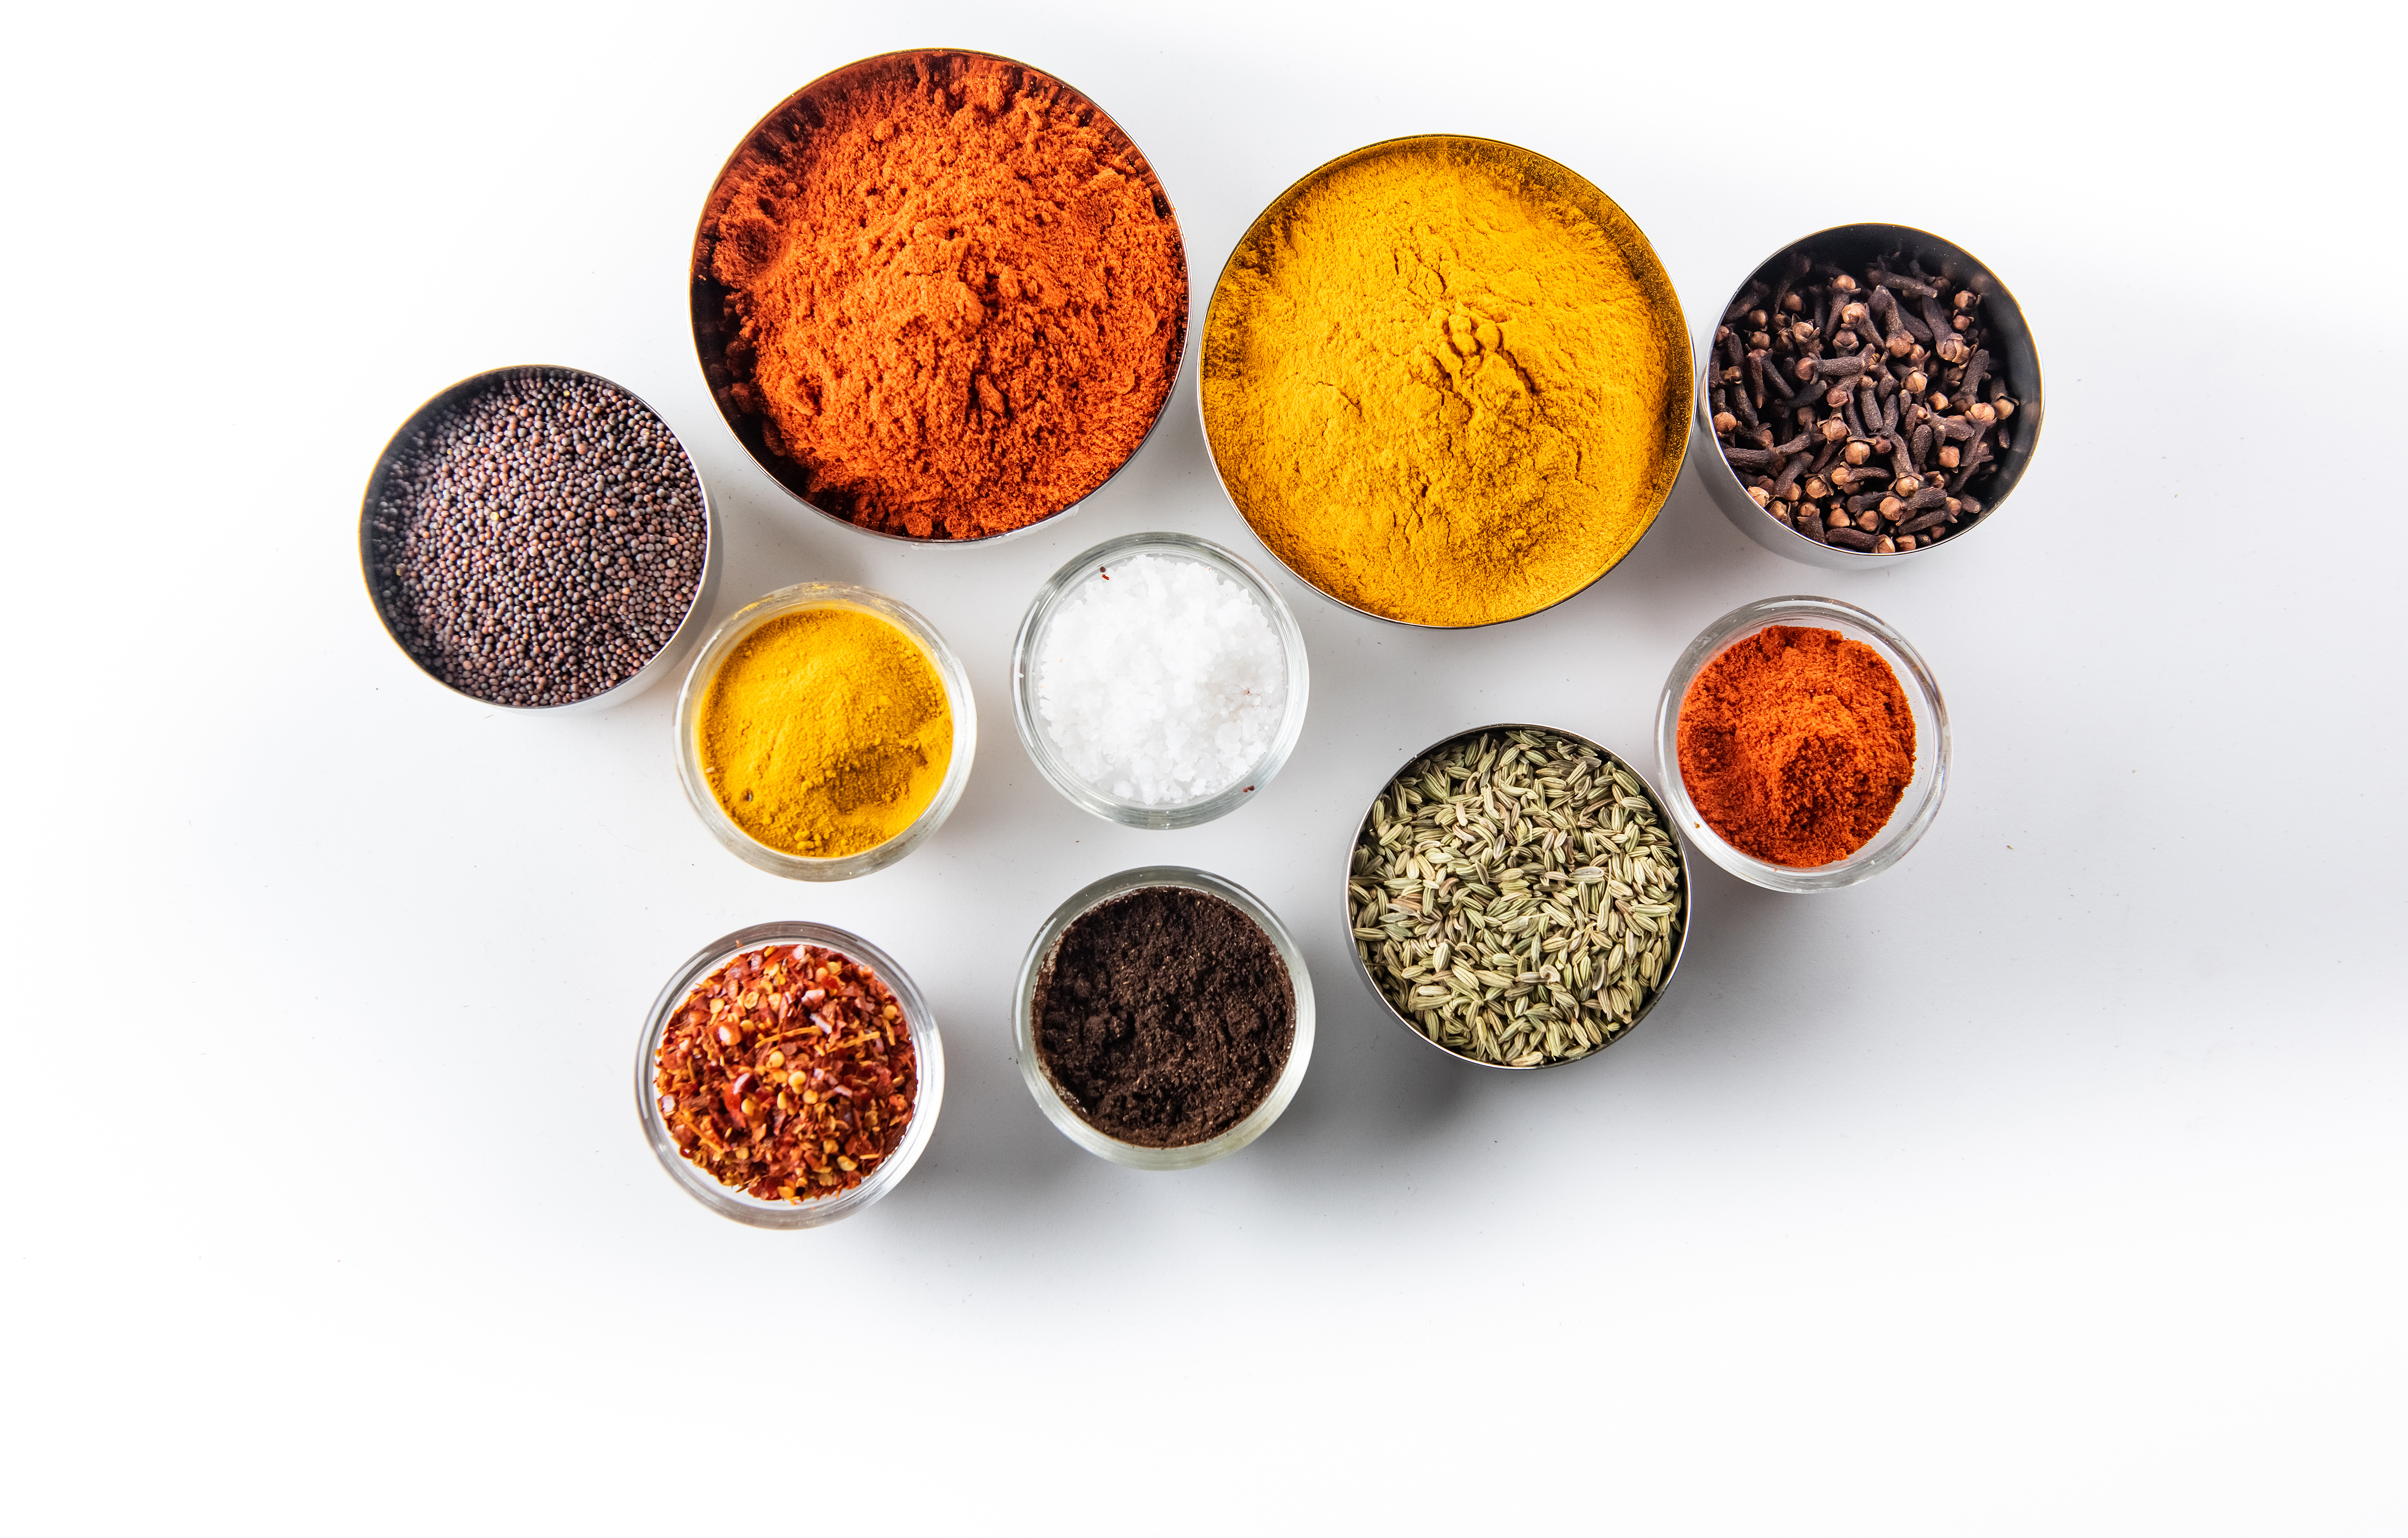 12 Essential Spices for Your Kitchen